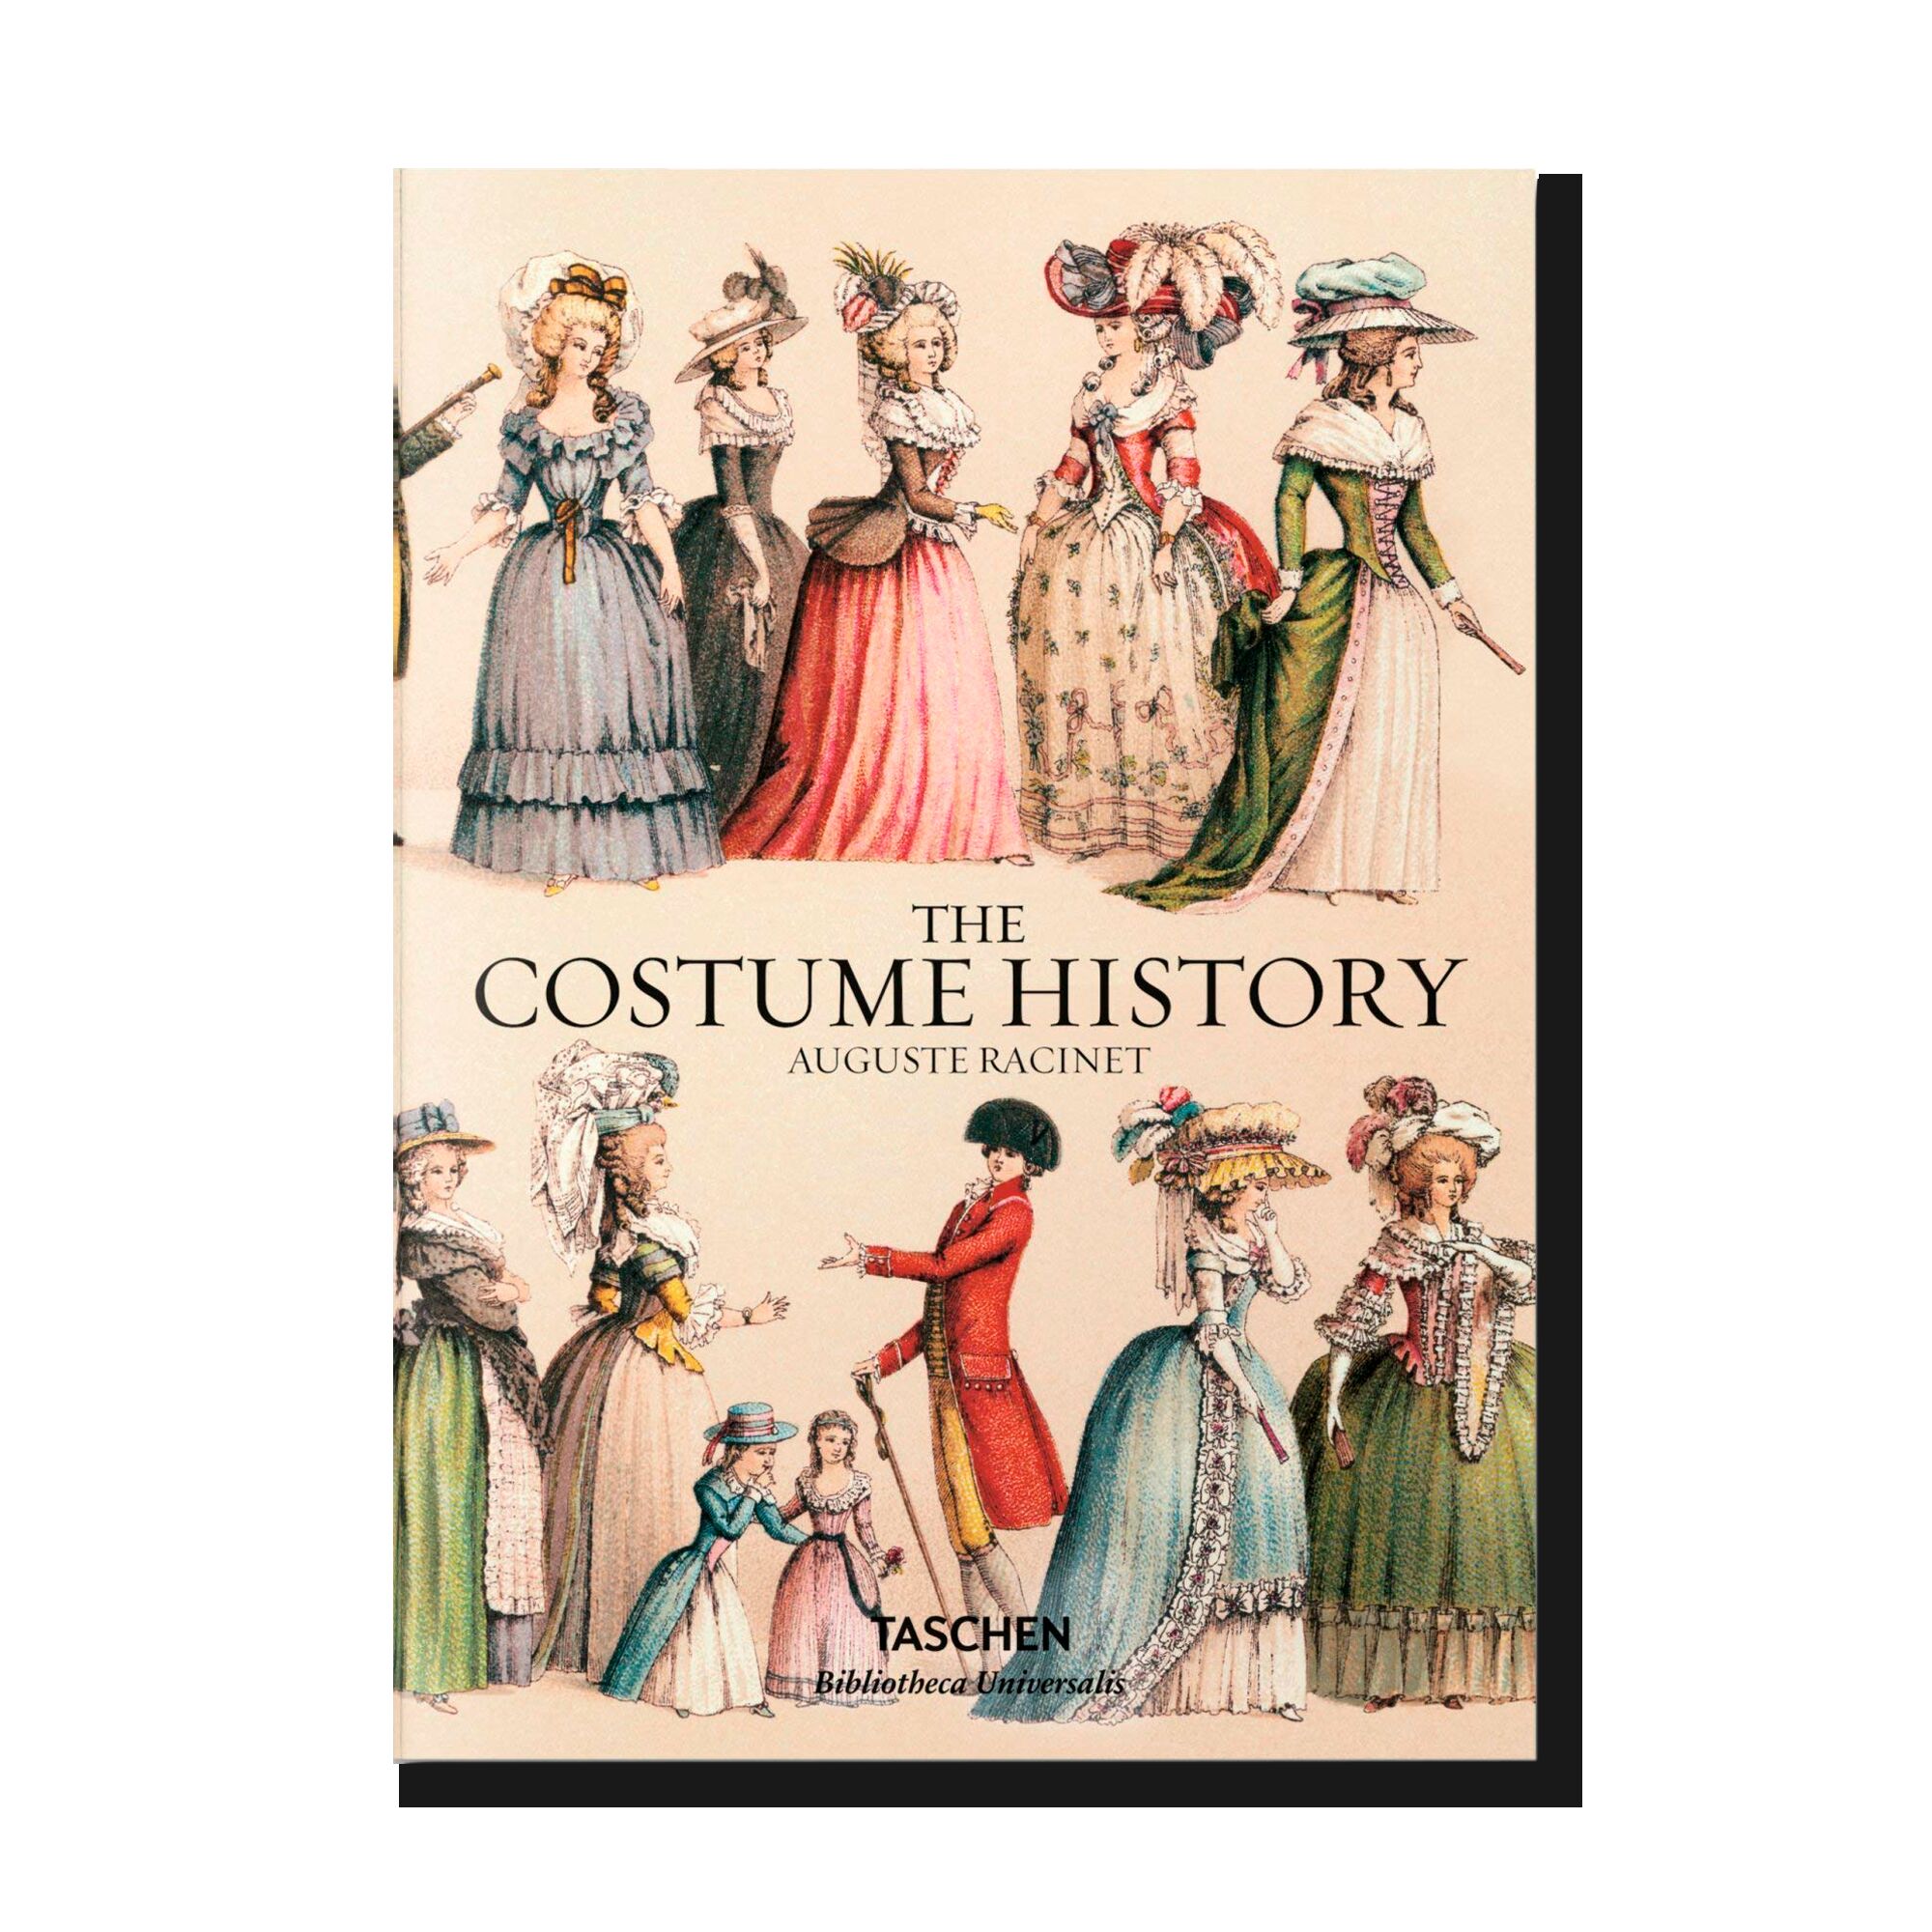 Auguste Racinet: The Complete Costume History